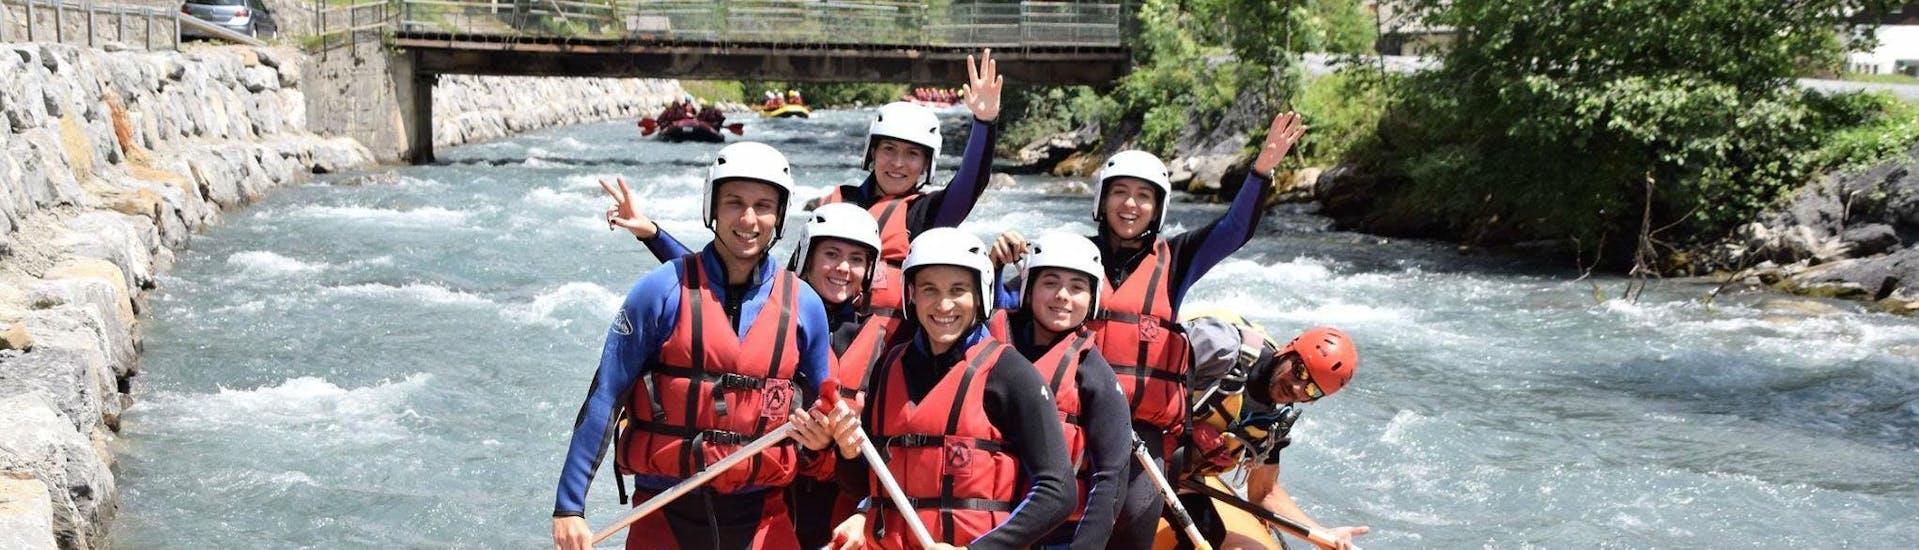 Leichte Rafting-Tour in Samoëns - Giffre.